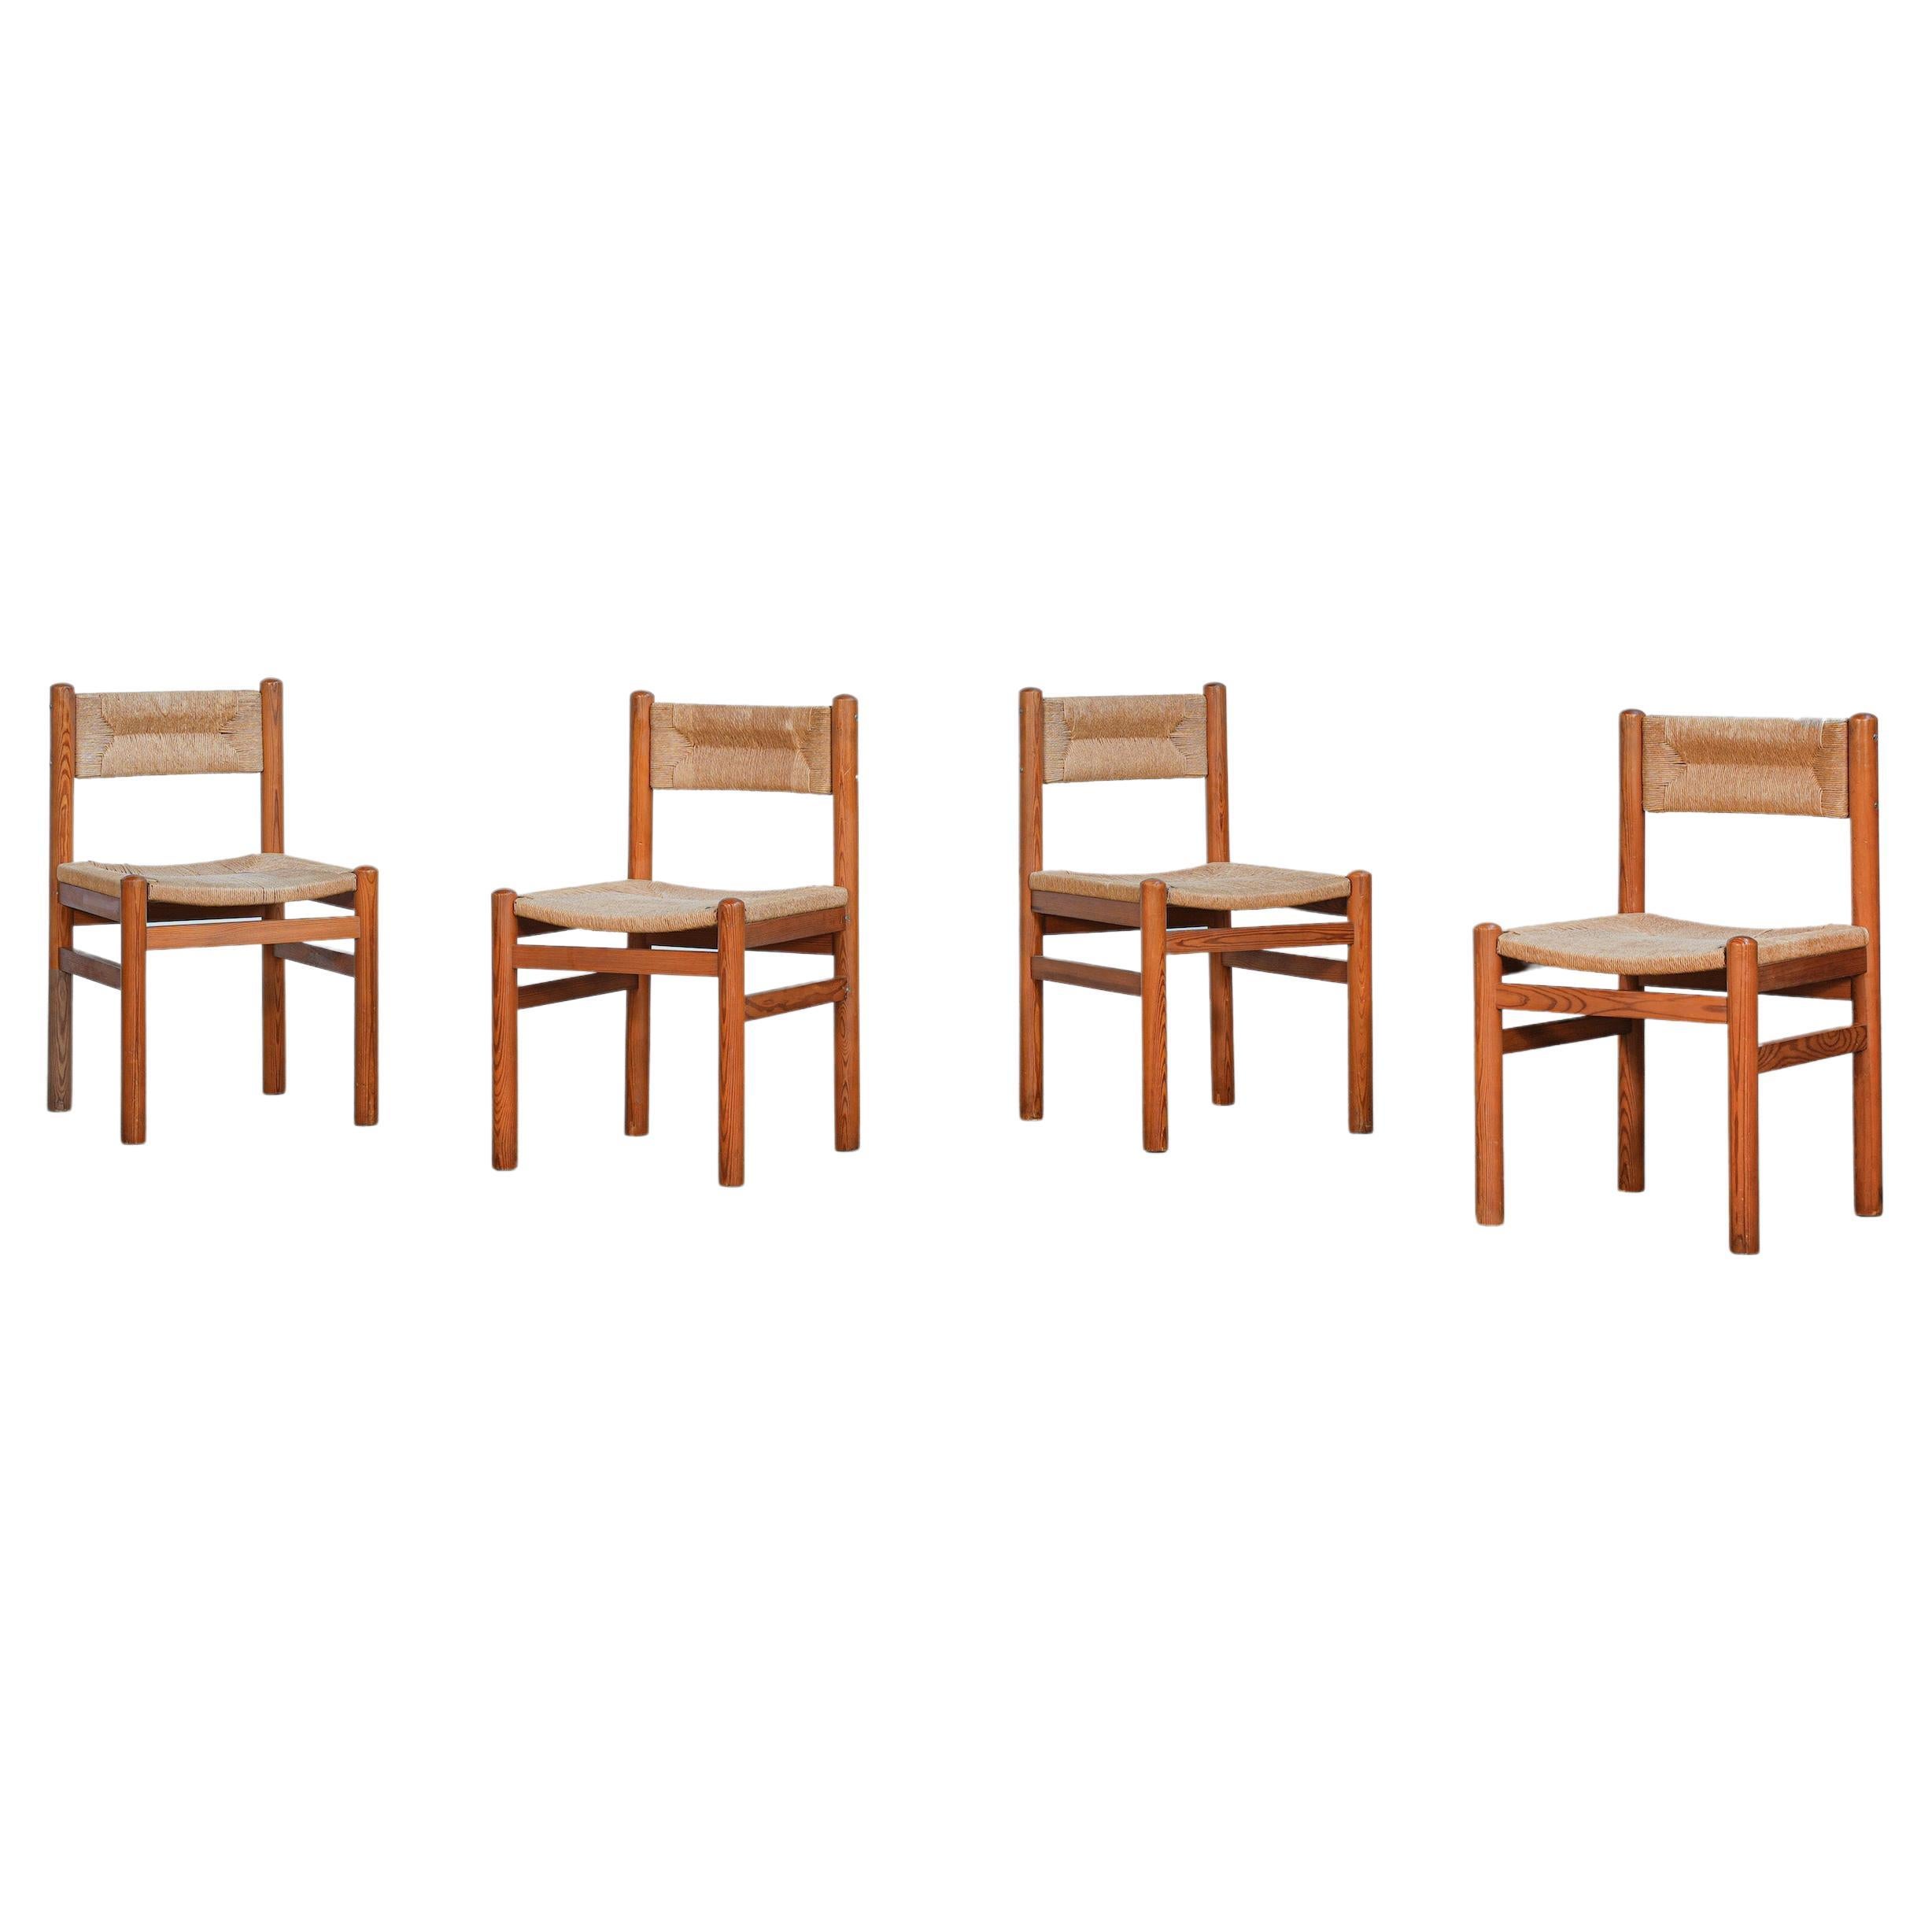 Rare Set of Four Danish Pine Chairs in the Style of Charlotte Perriand, 1960ies